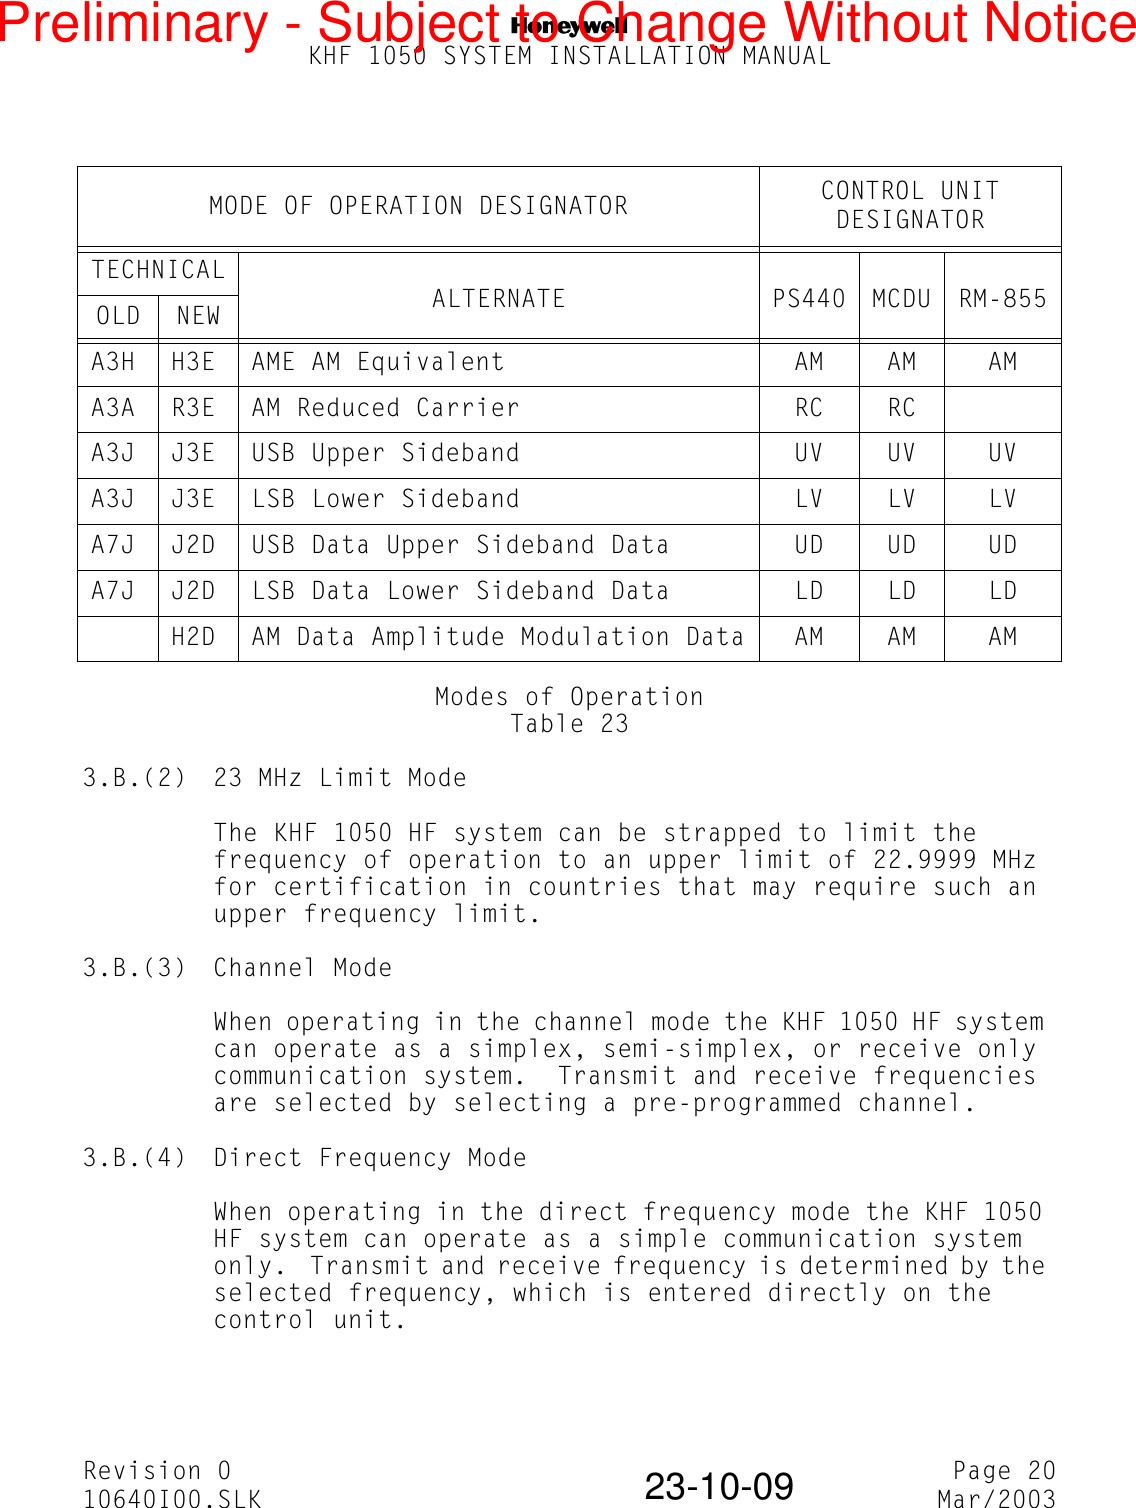 NKHF 1050 SYSTEM INSTALLATION MANUALRevision 0 Page 2010640I00.SLK Mar/200323-10-09Modes of OperationTable 233.B.(2) 23 MHz Limit ModeThe KHF 1050 HF system can be strapped to limit the frequency of operation to an upper limit of 22.9999 MHz for certification in countries that may require such an upper frequency limit.3.B.(3) Channel ModeWhen operating in the channel mode the KHF 1050 HF system can operate as a simplex, semi-simplex, or receive only communication system.  Transmit and receive frequencies are selected by selecting a pre-programmed channel.3.B.(4) Direct Frequency ModeWhen operating in the direct frequency mode the KHF 1050 HF system can operate as a simple communication system only.  Transmit and receive frequency is determined by the selected frequency, which is entered directly on the control unit.MODE OF OPERATION DESIGNATOR CONTROL UNIT DESIGNATORTECHNICALALTERNATE PS440 MCDU RM-855OLD NEWA3H H3E AME AM Equivalent AM AM AMA3A R3E AM Reduced Carrier RC RCA3J J3E USB Upper Sideband UV UV UVA3J J3E LSB Lower Sideband LV LV LVA7J J2D USB Data Upper Sideband Data UD UD UDA7J J2D LSB Data Lower Sideband Data LD LD LDH2D AM Data Amplitude Modulation Data AM AM AMPreliminary - Subject to Change Without Notice